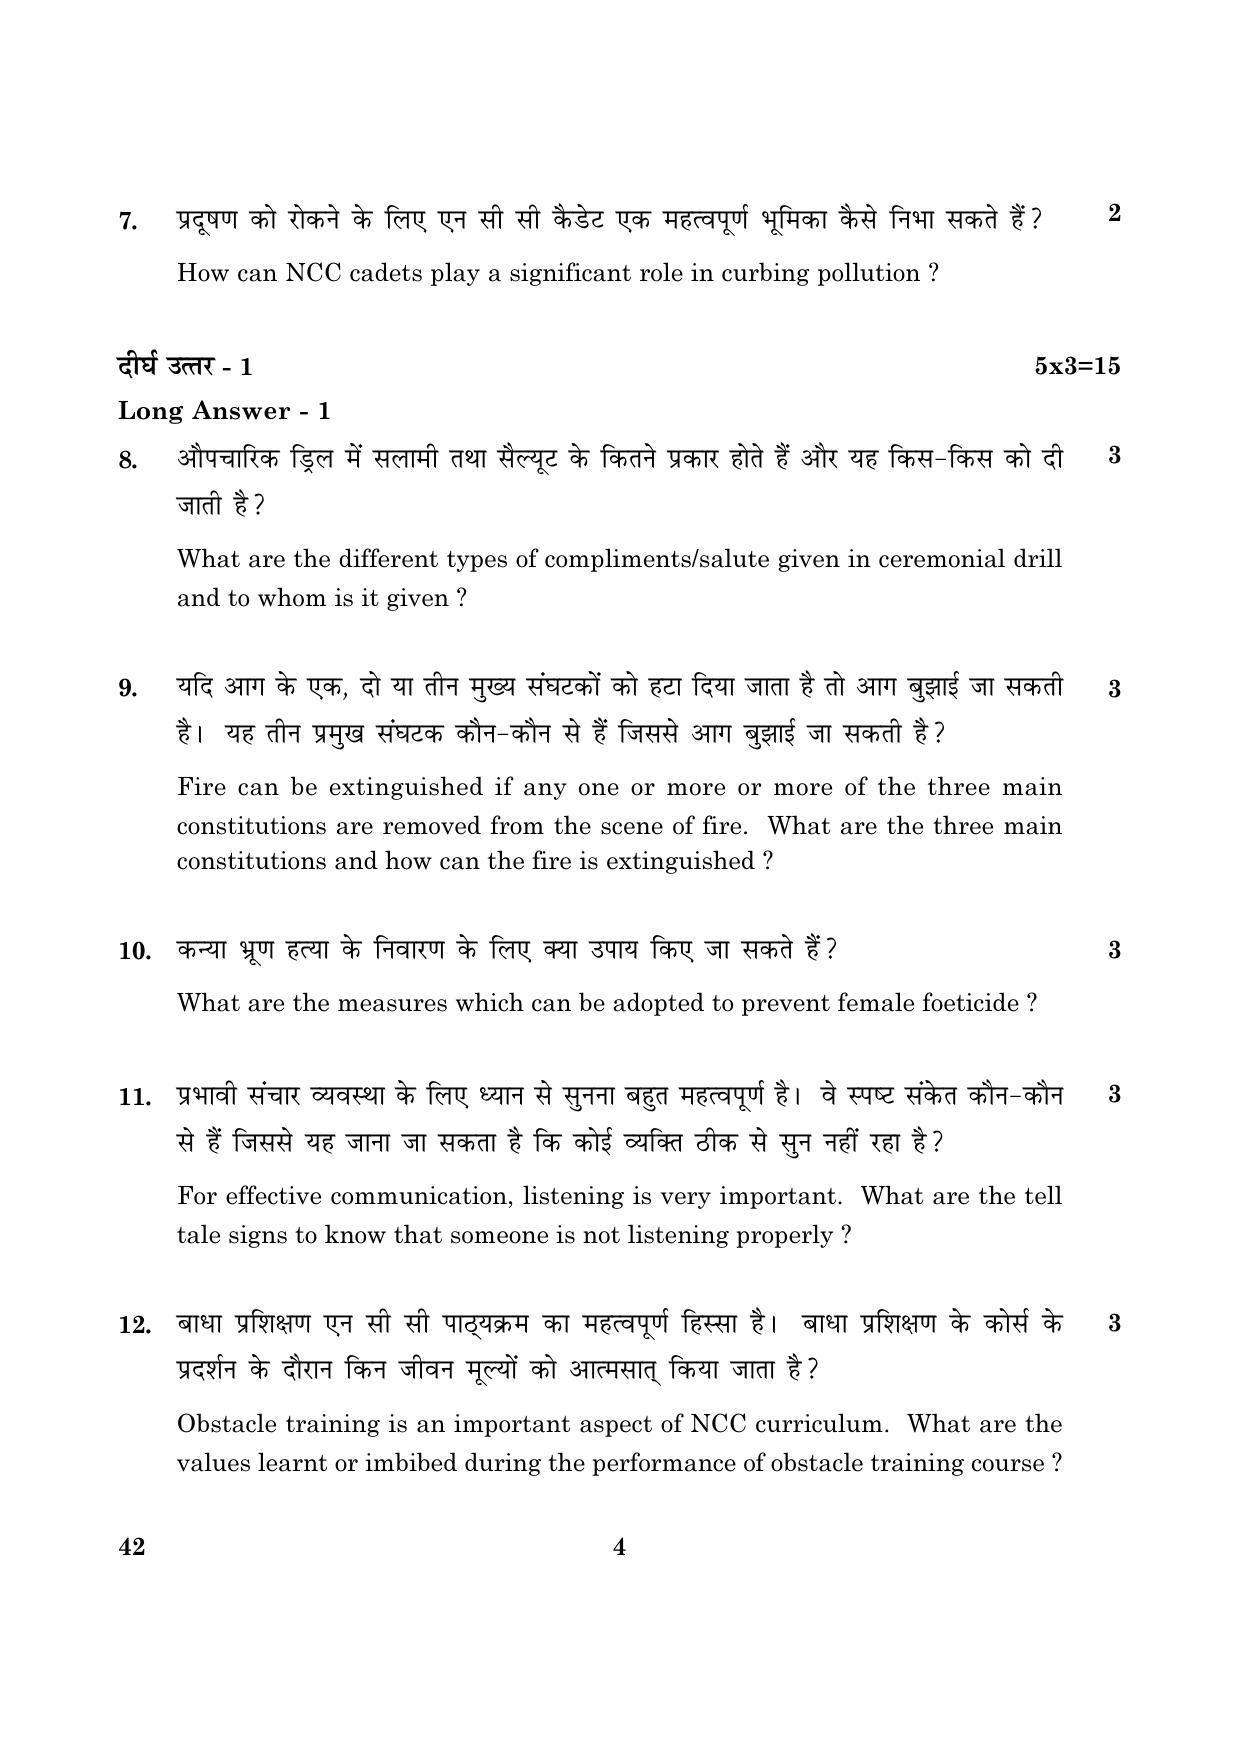 CBSE Class 12 042 National Cadet Corps (NCC) 2016 Question Paper - Page 4